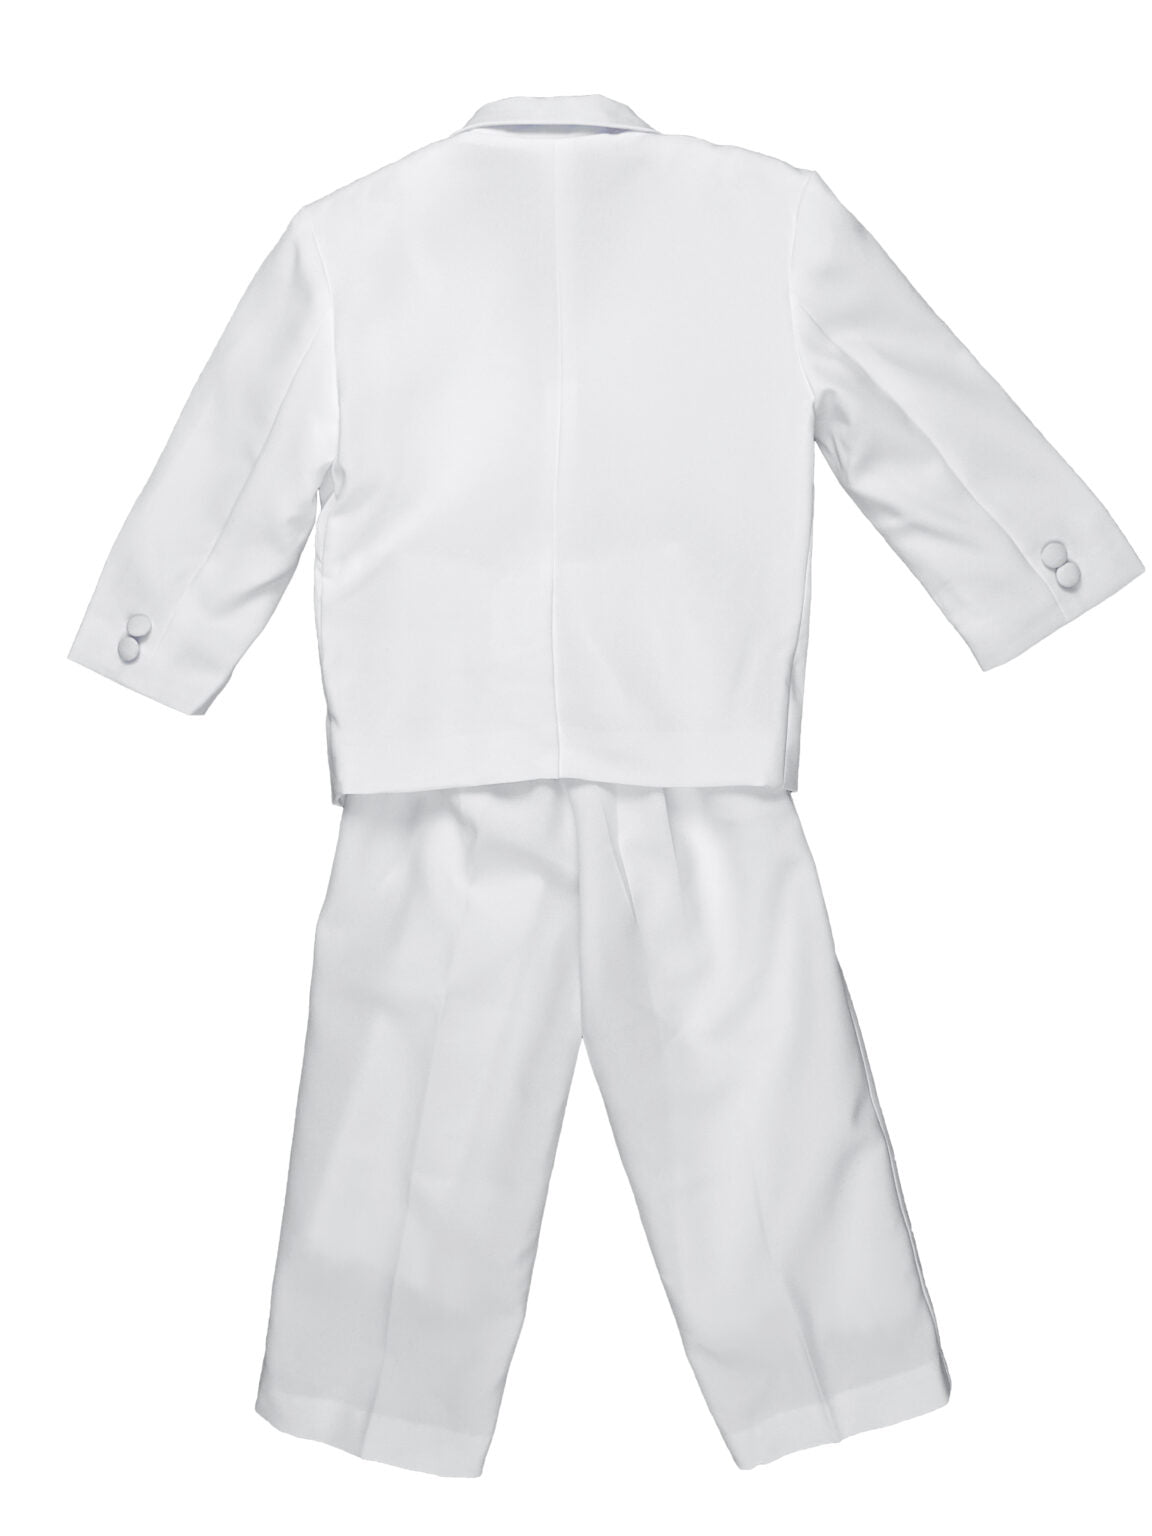 Boys Formal 5 Piece Suit with Shirt and Vest – White - AH-BY013